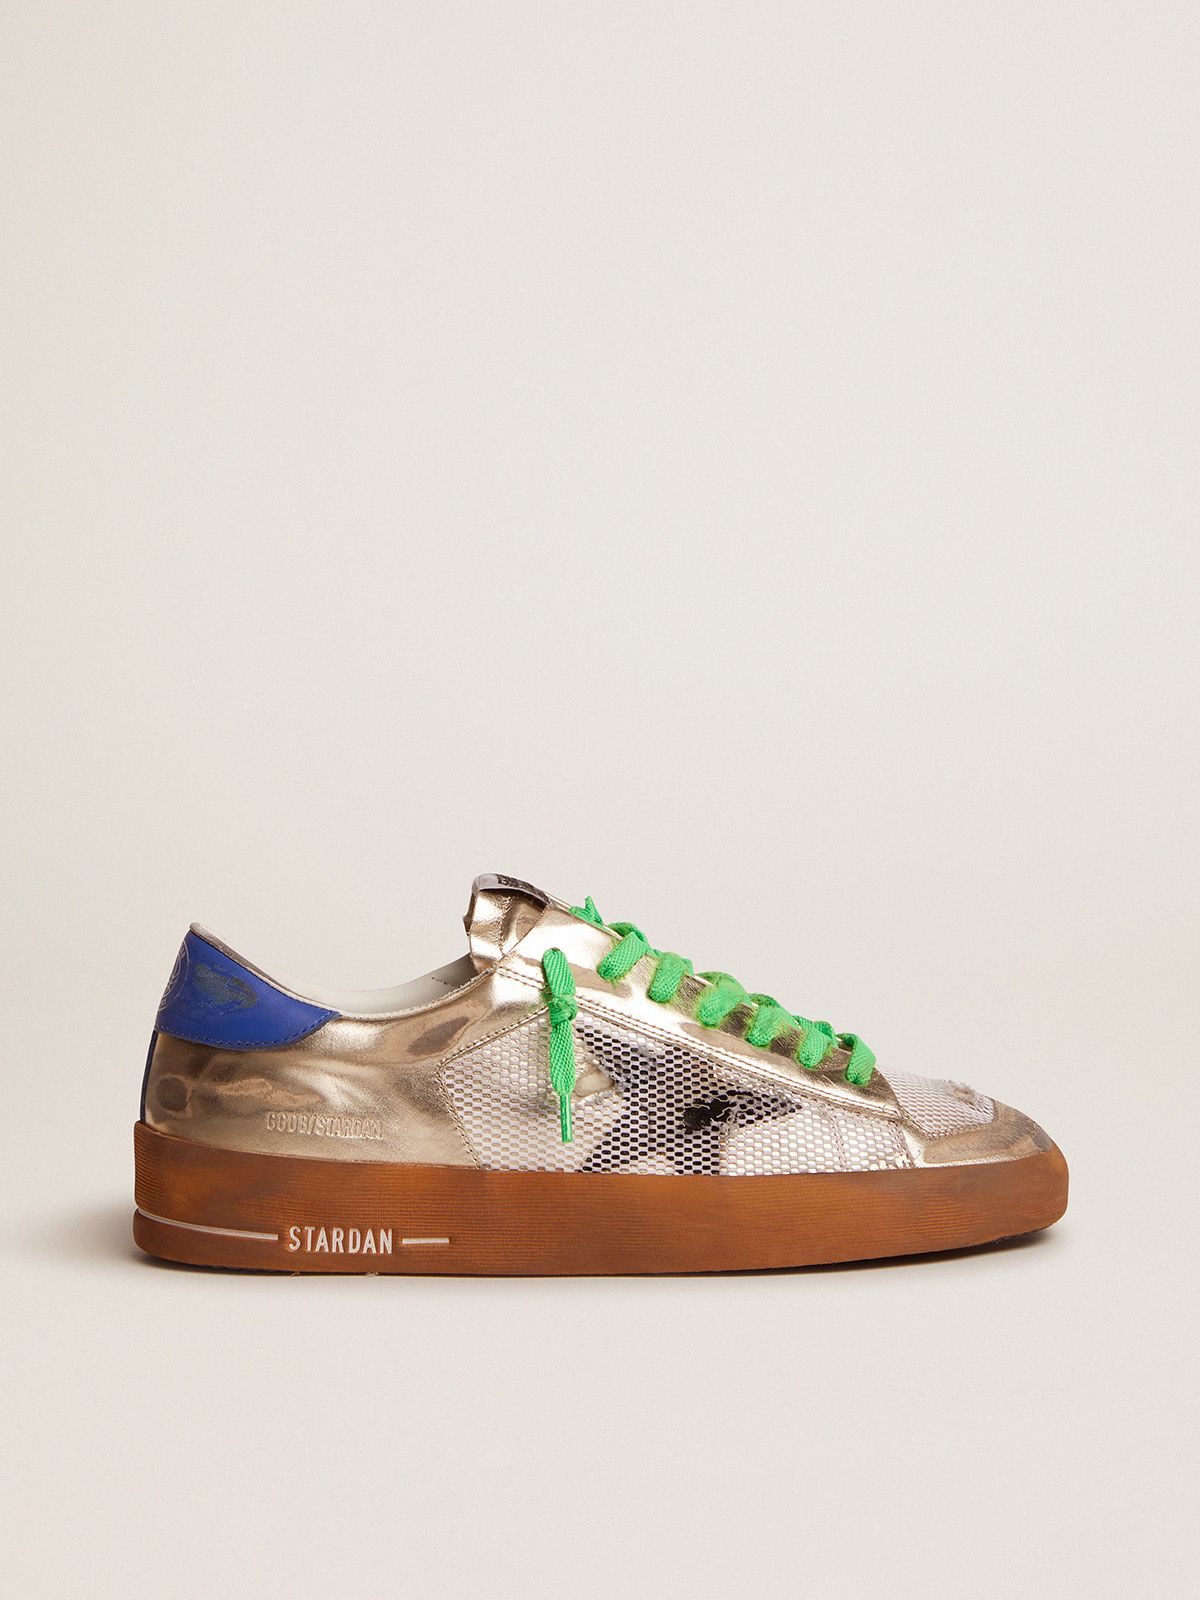 Stardan LAB sneakers in laminated leather and mesh with an electric blue heel tab | 